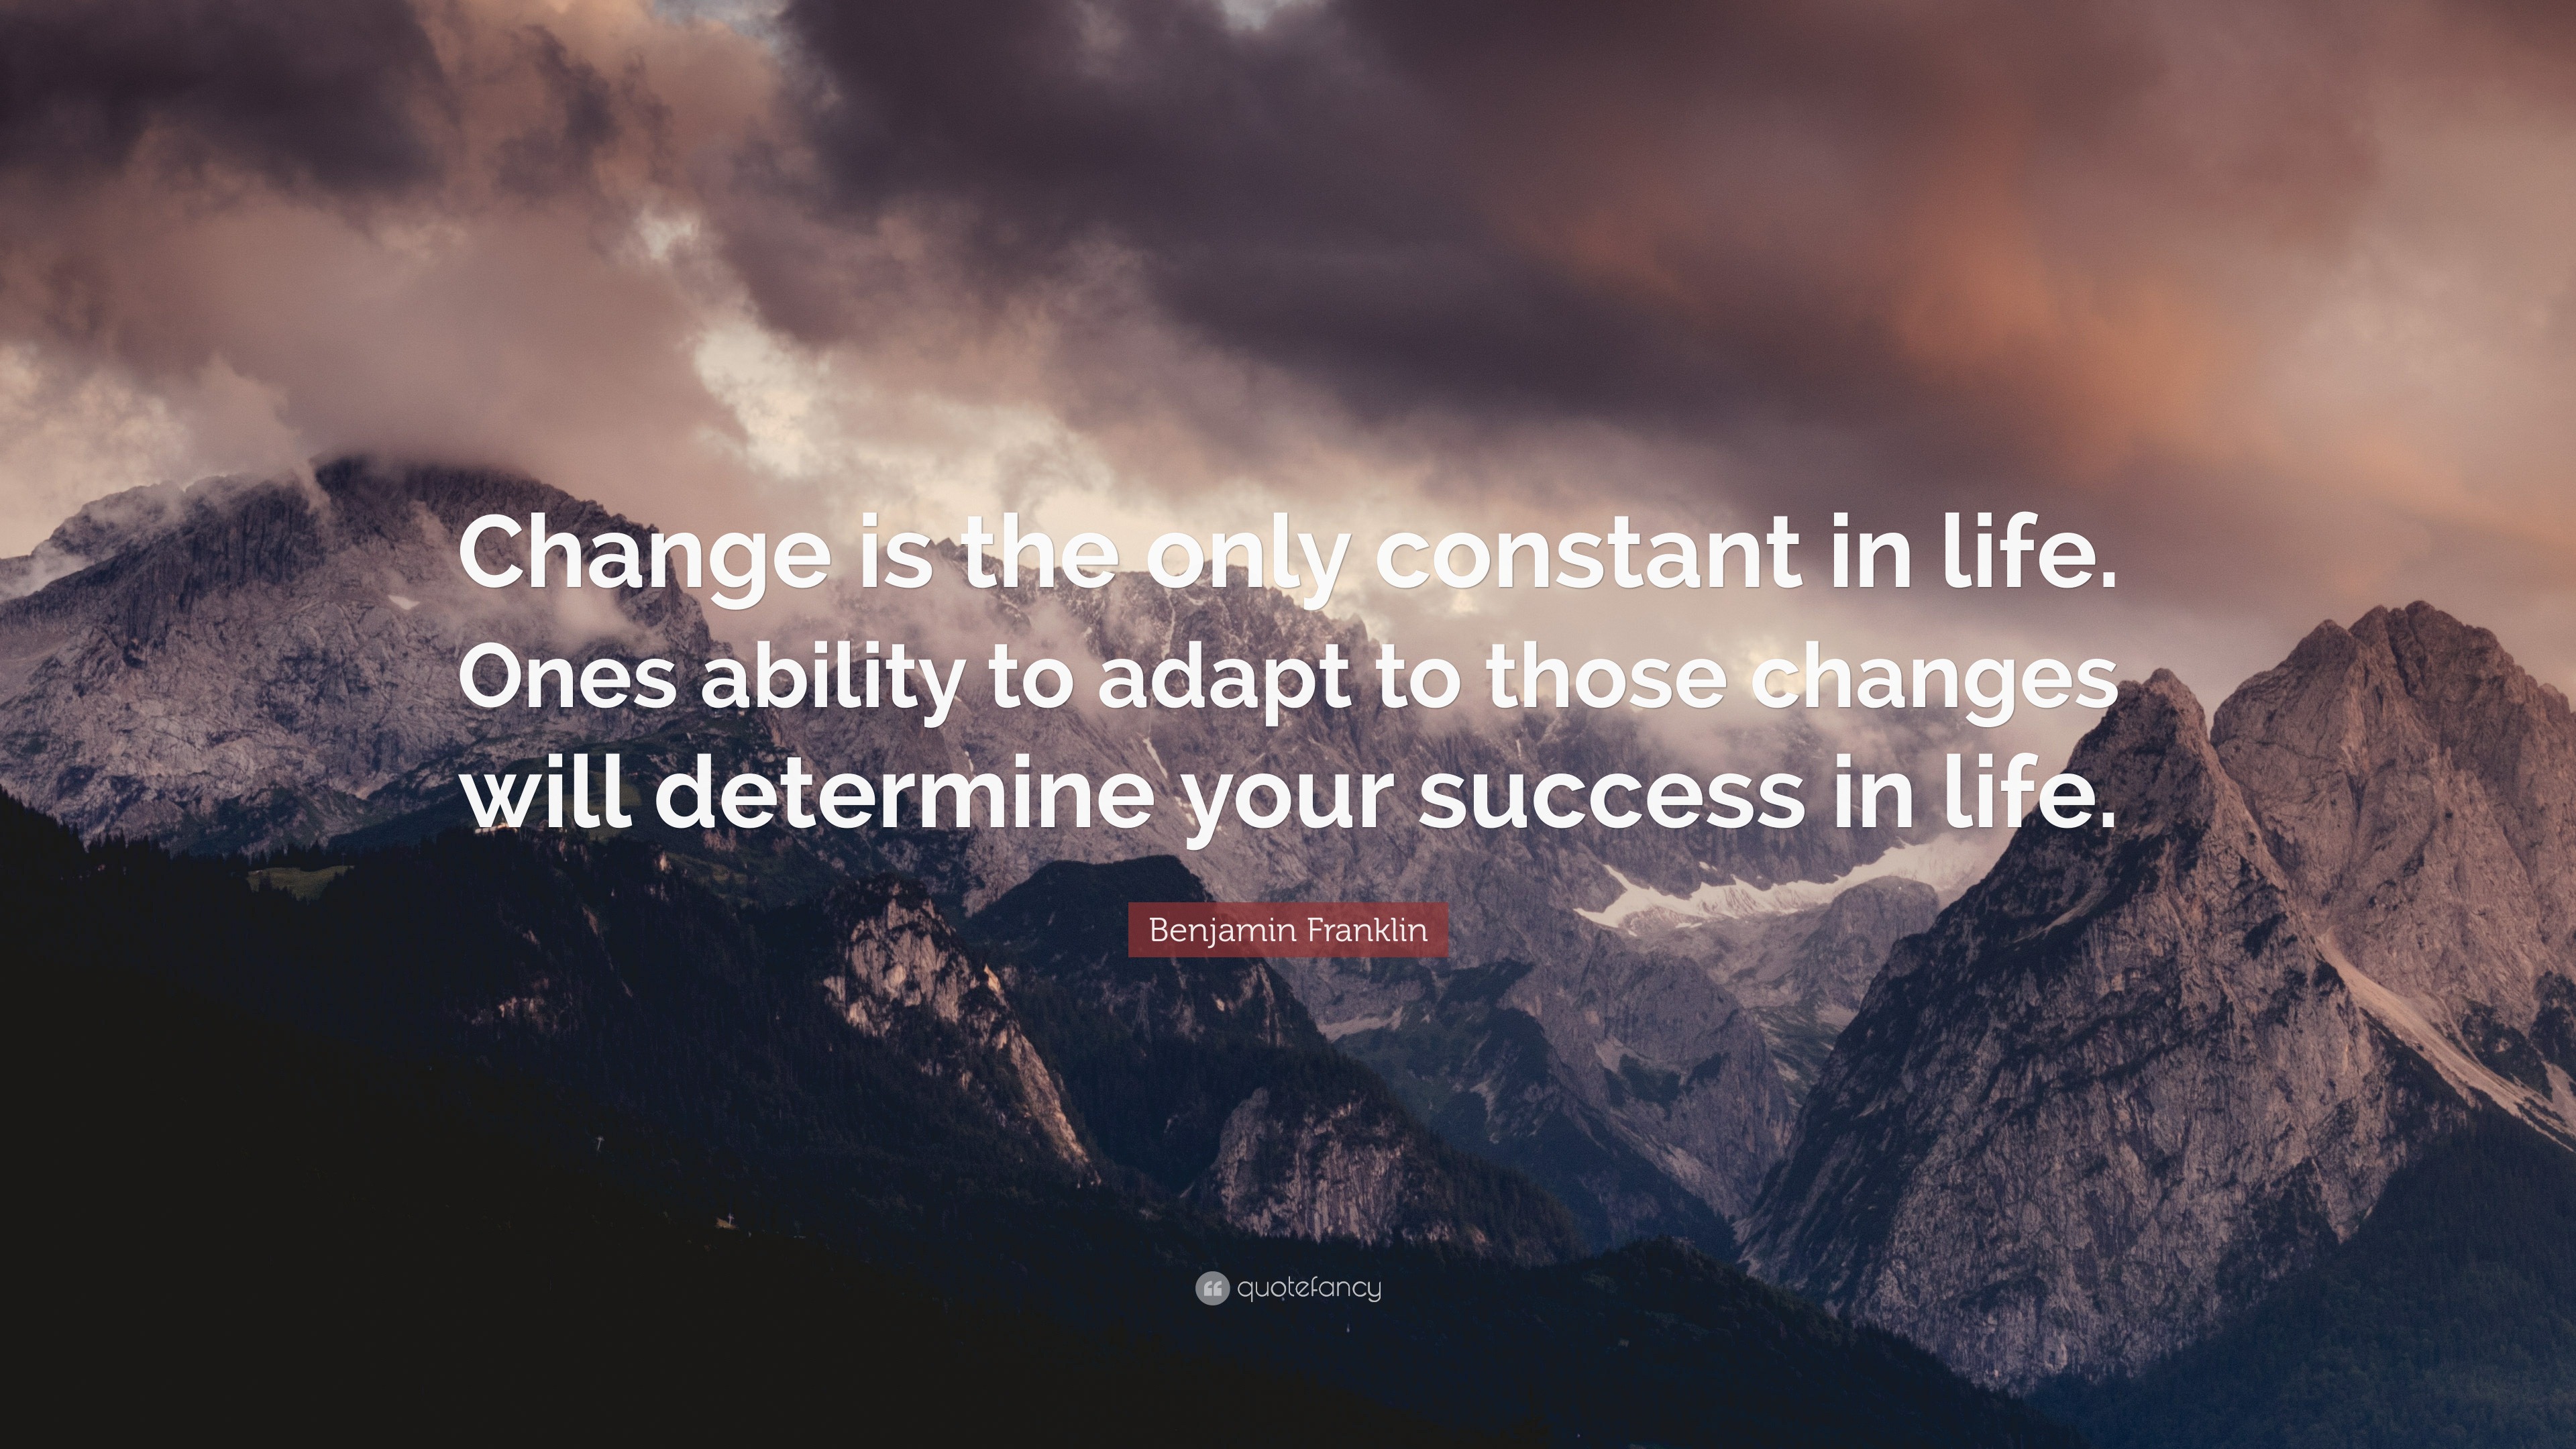 Benjamin Franklin Quote “Change is the only constant in life es ability to